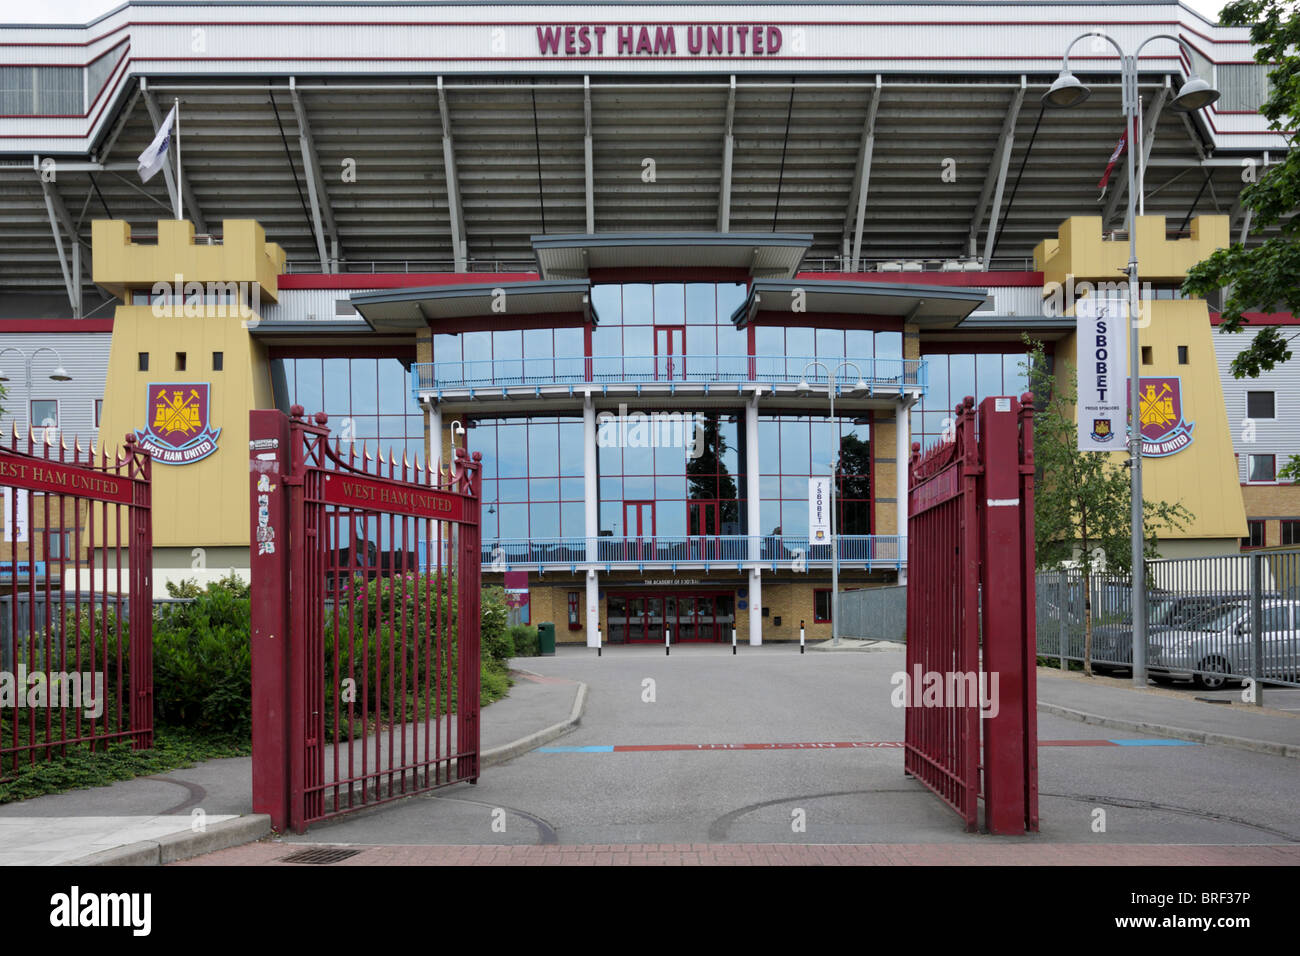 The main entrance and front elevation of West Ham United's ground in Green Street, London E13. Stock Photo